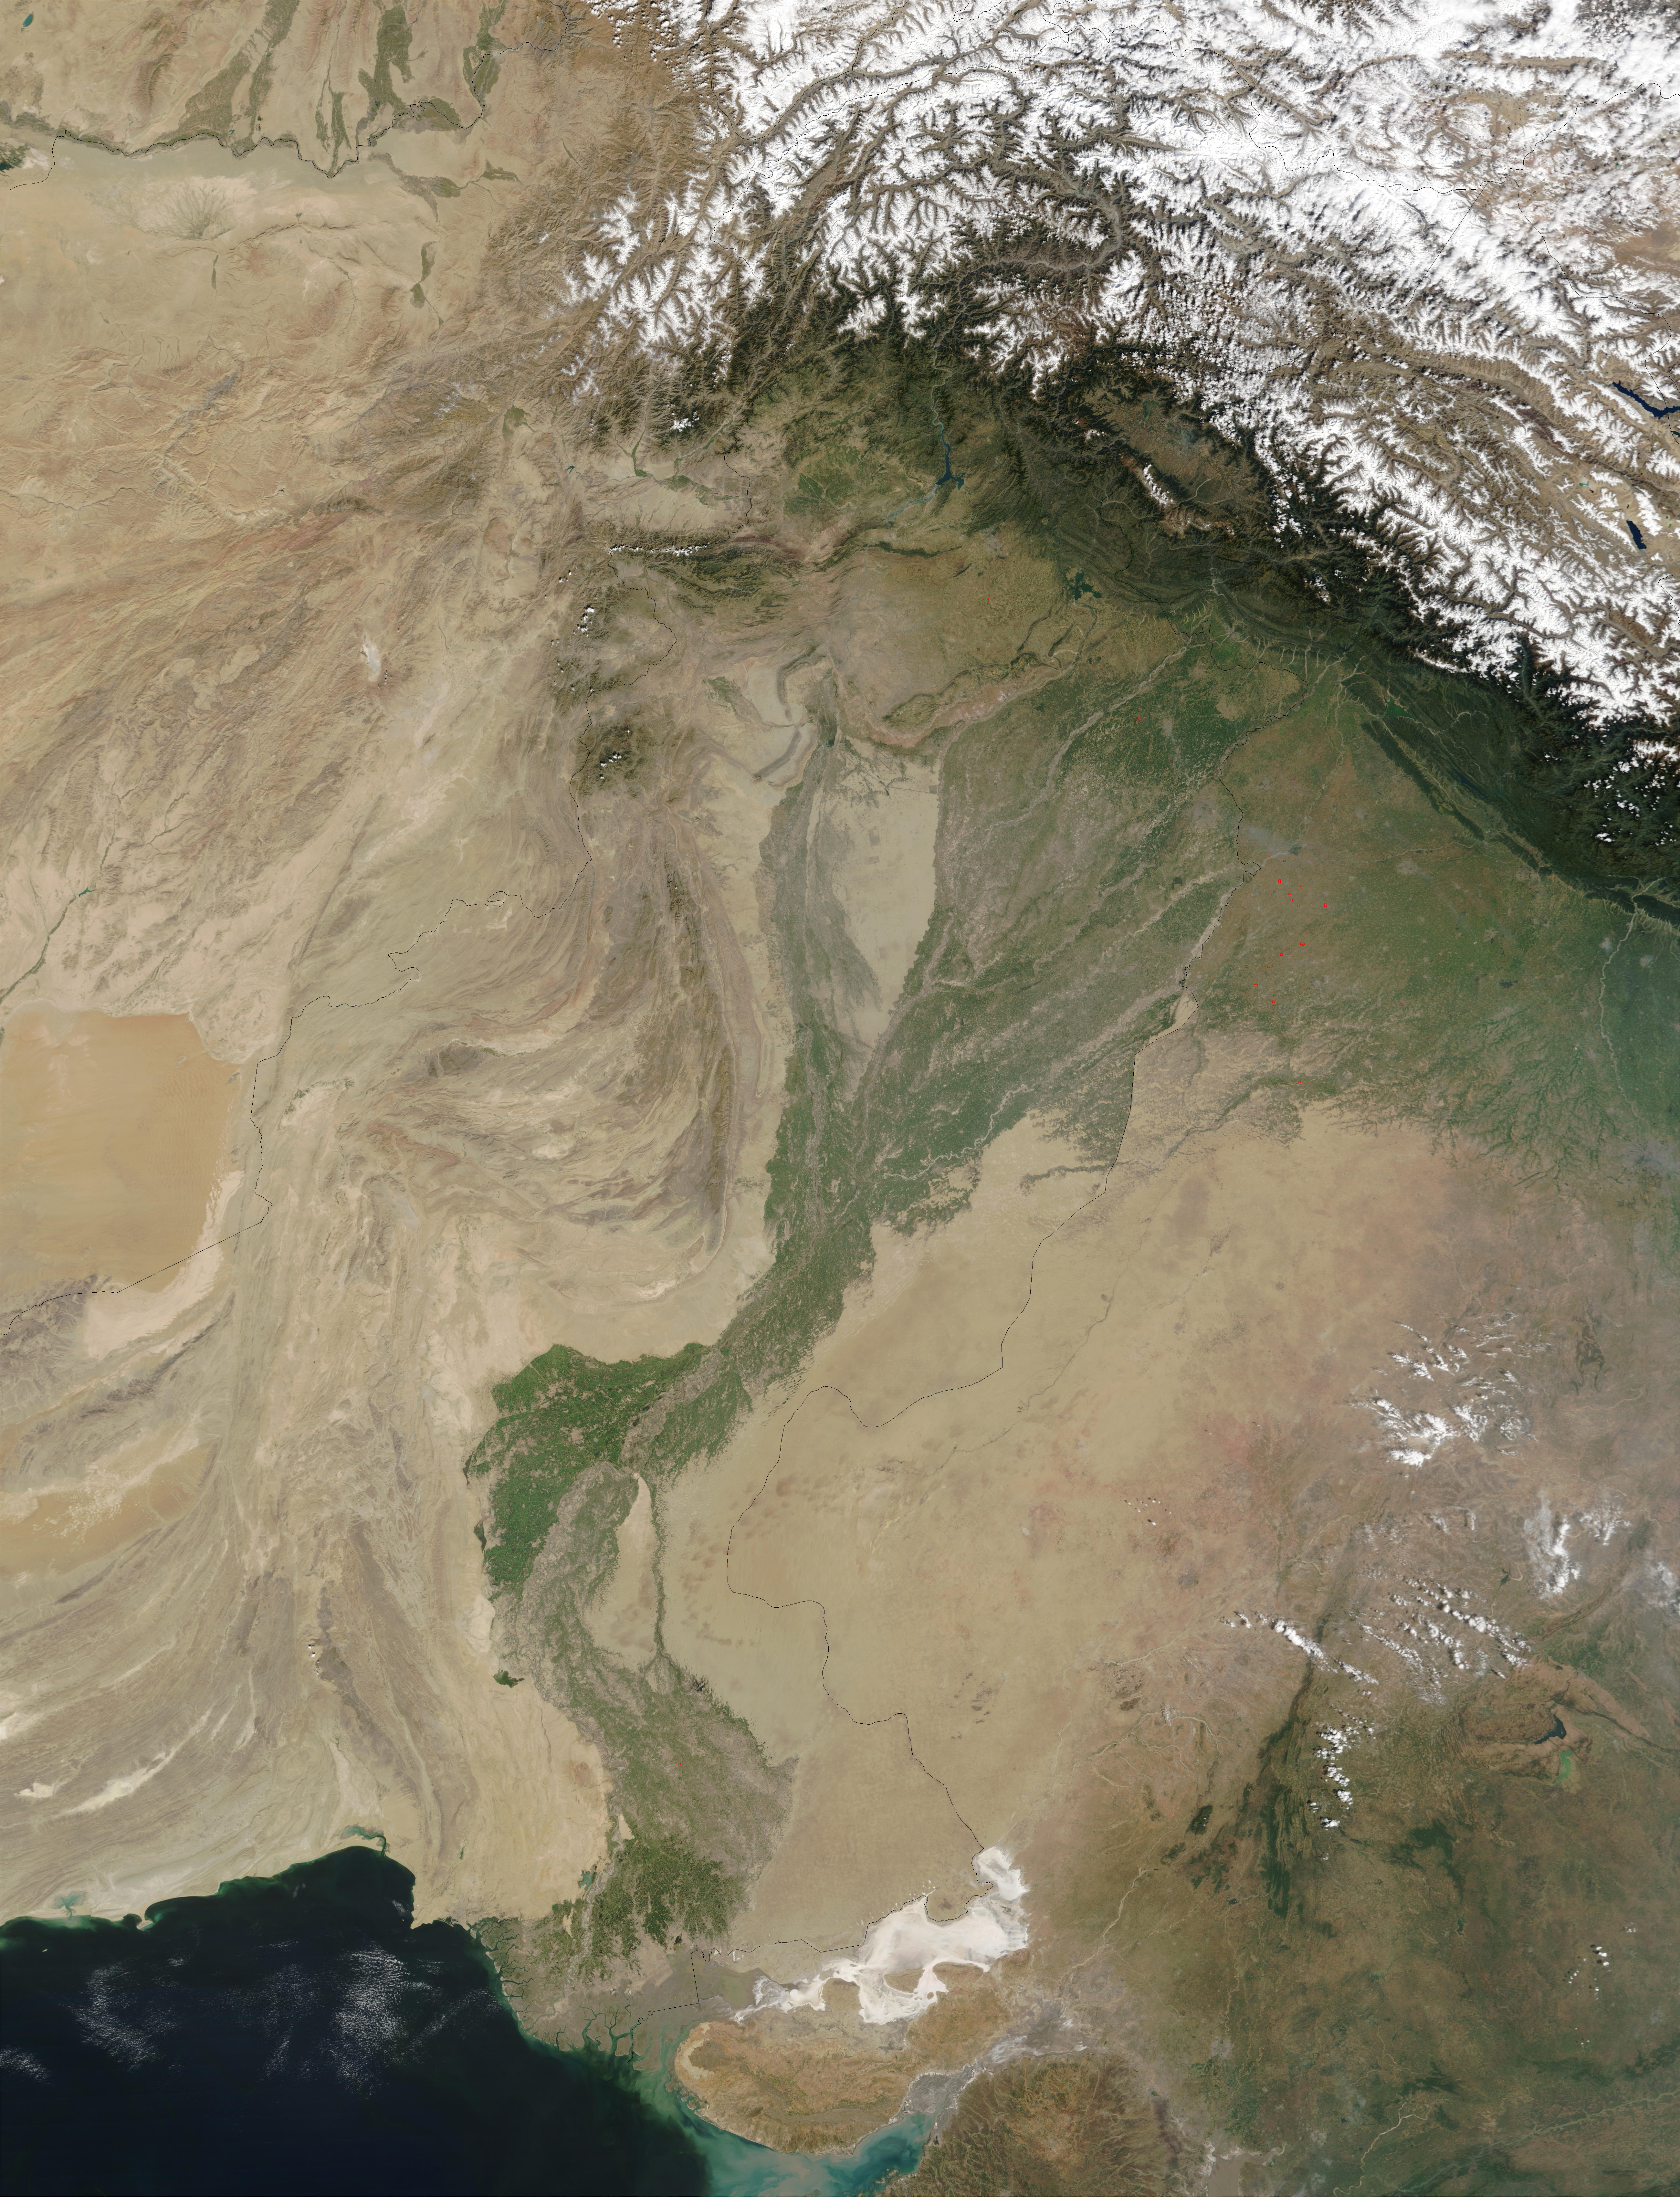 Indus River, Pakistan - related image preview